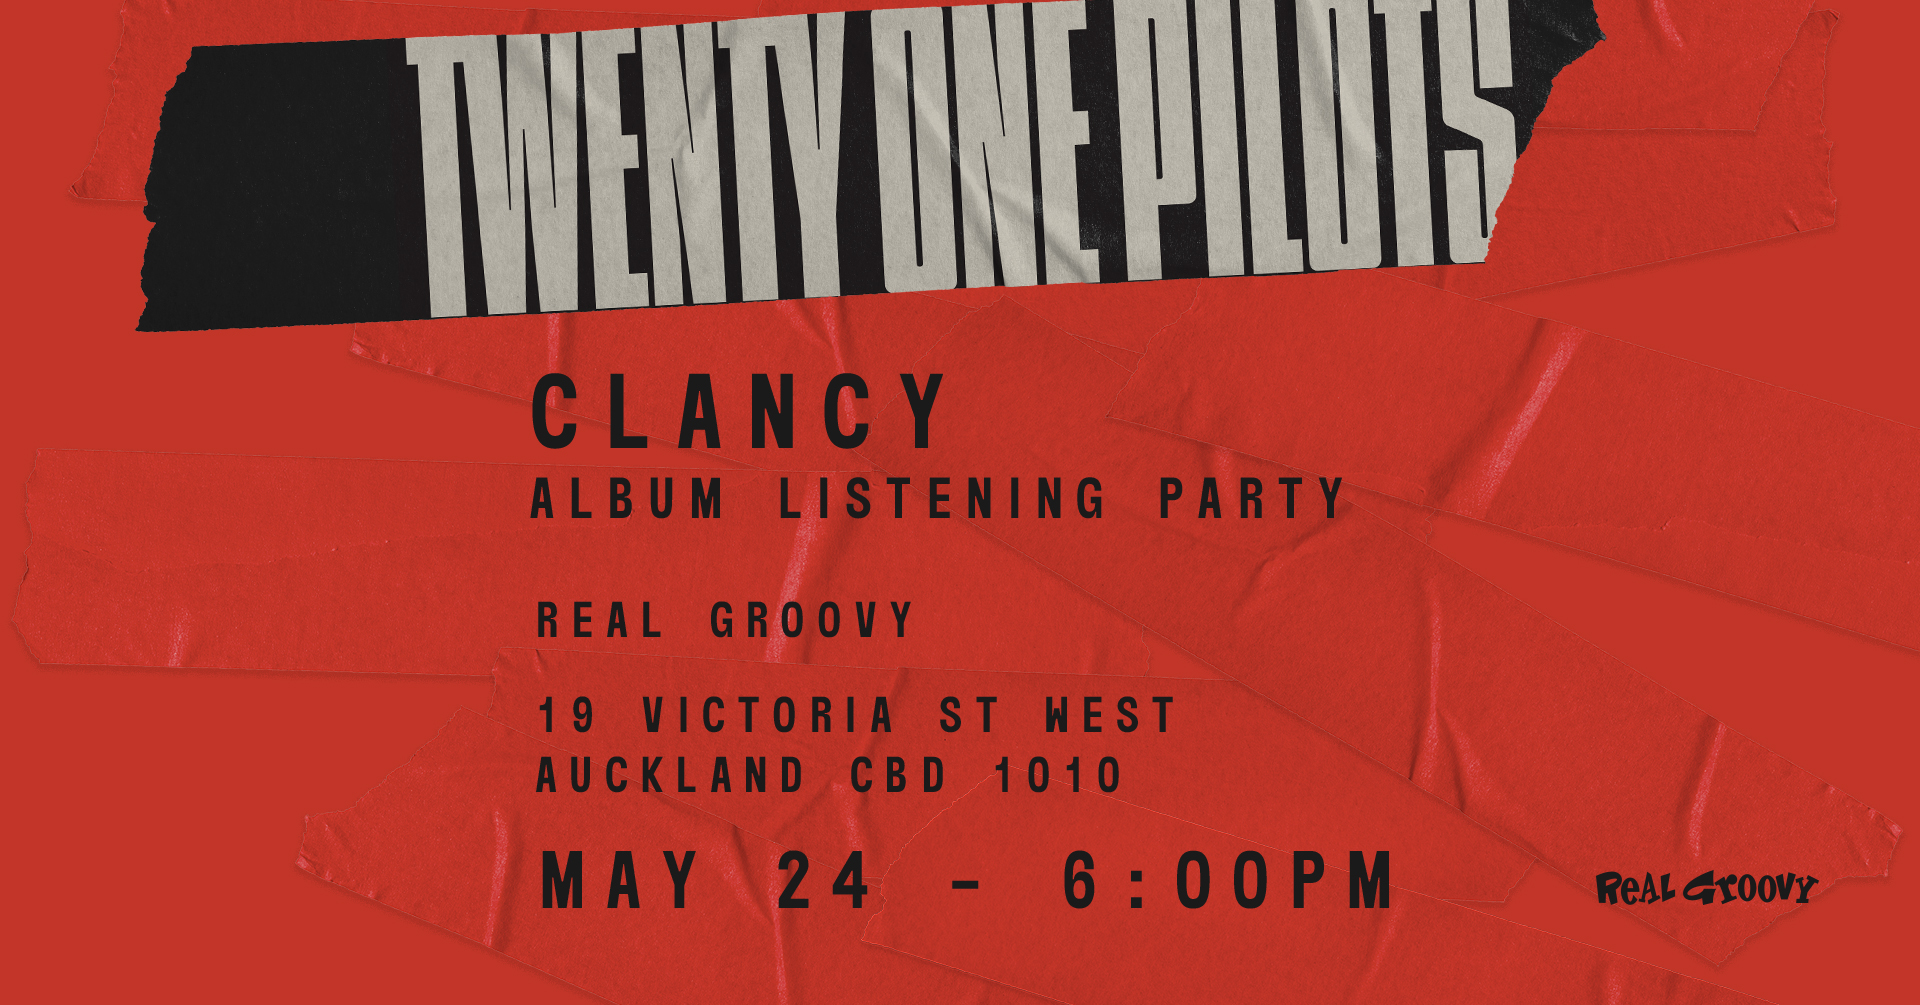 Real Groovy Presents: Twenty One Pilots Clancy Listening Party